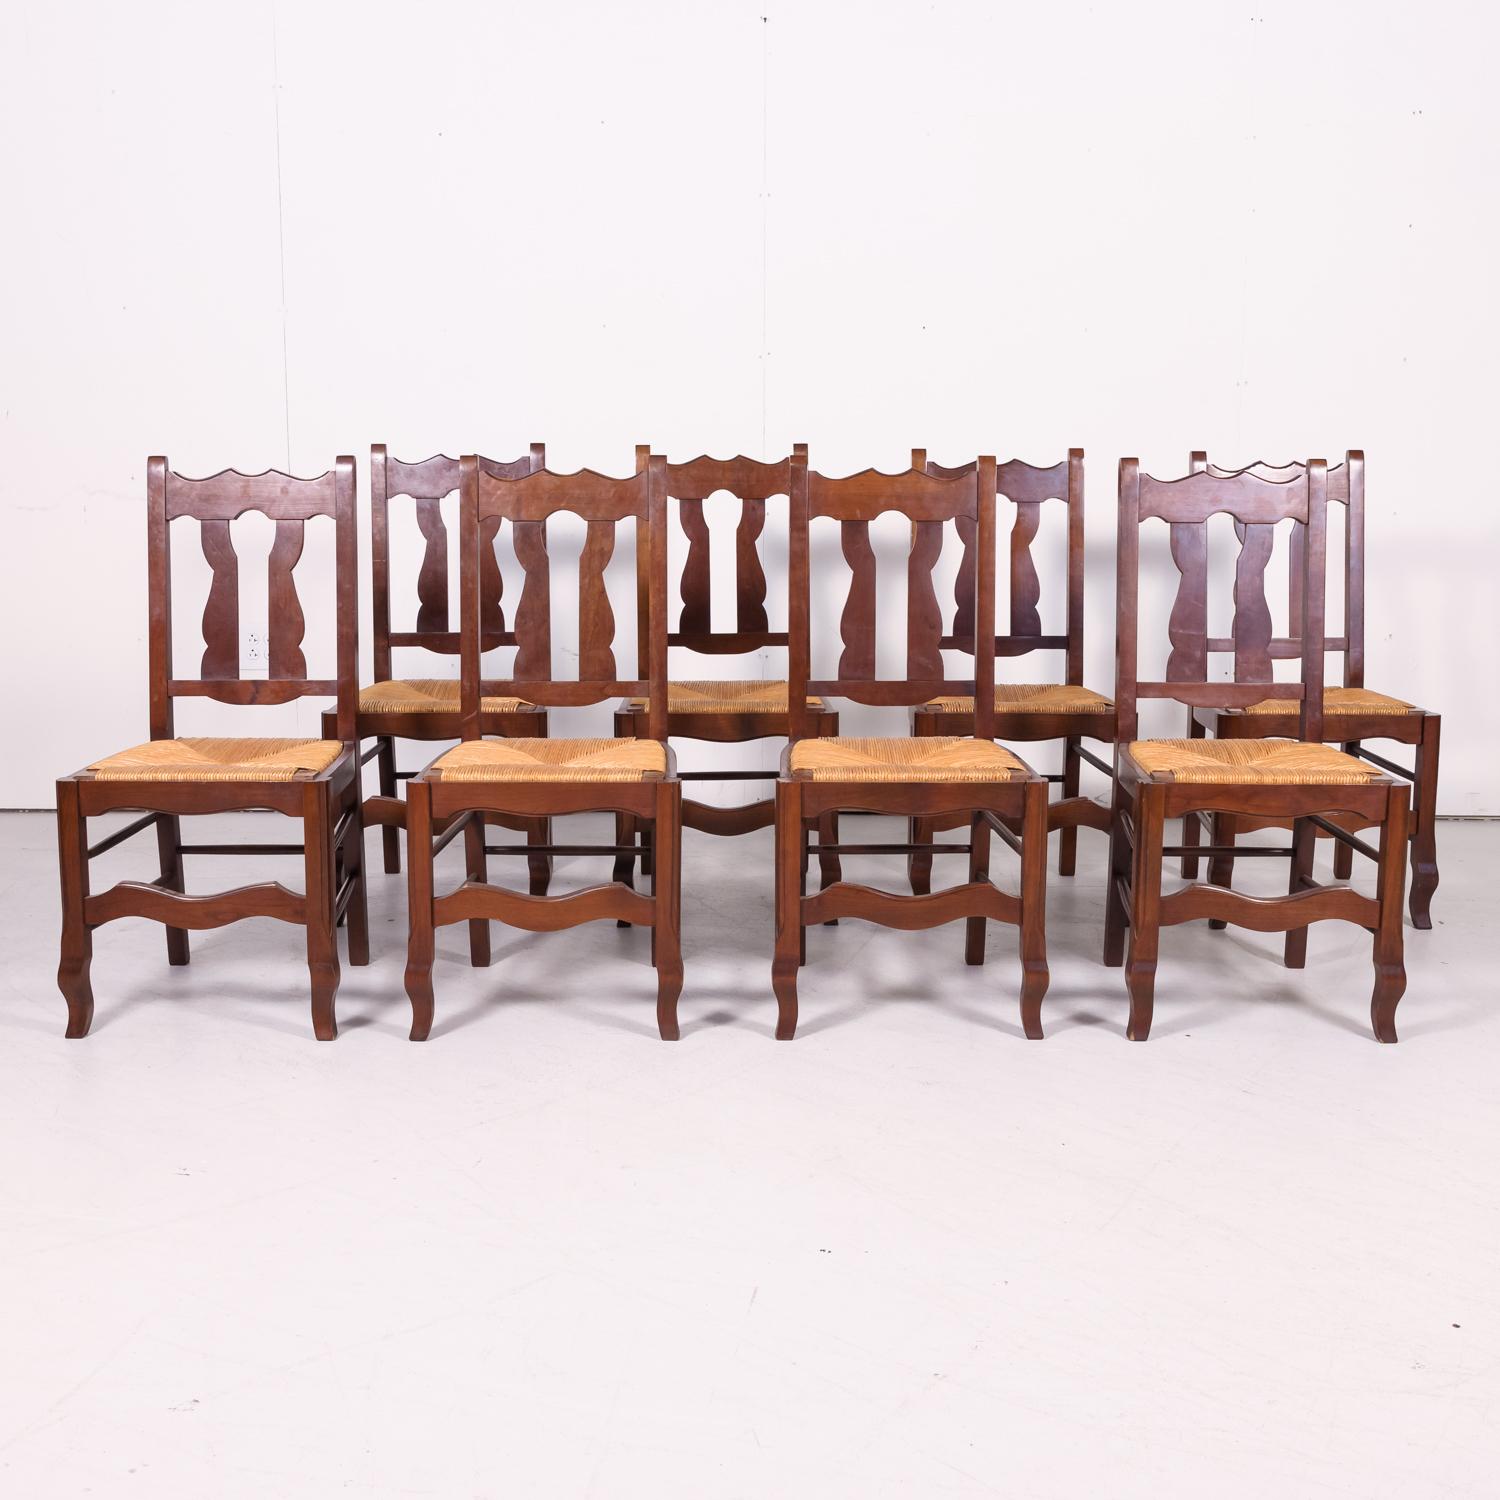 Set of 8 antique Country French hand carved oak dining chairs handcrafted in Normandy having carved backs with vertical slats and rush slip seats, circa 1920s. Raised on stylized cabriole legs joined by a carved front stretcher and turned side